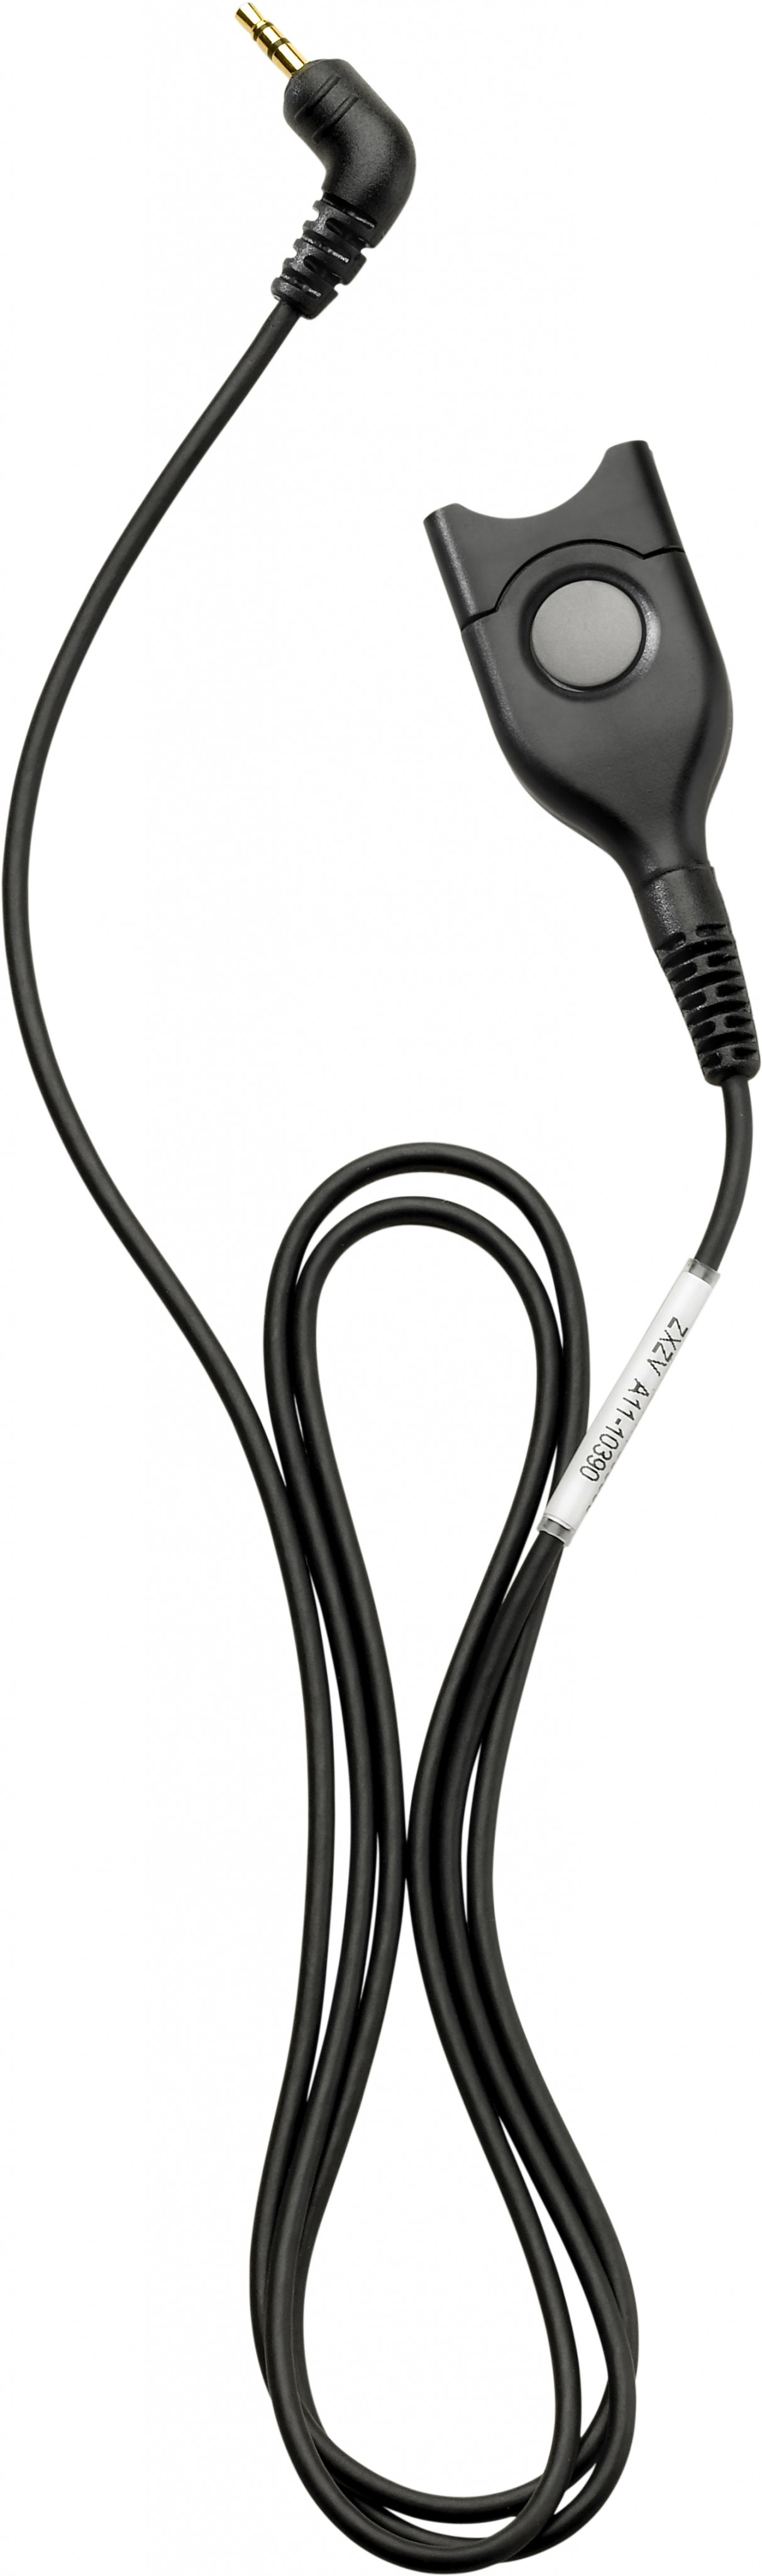 Sennheiser Epos CALC 01, cable for Alcatel IP touch 4028/4038